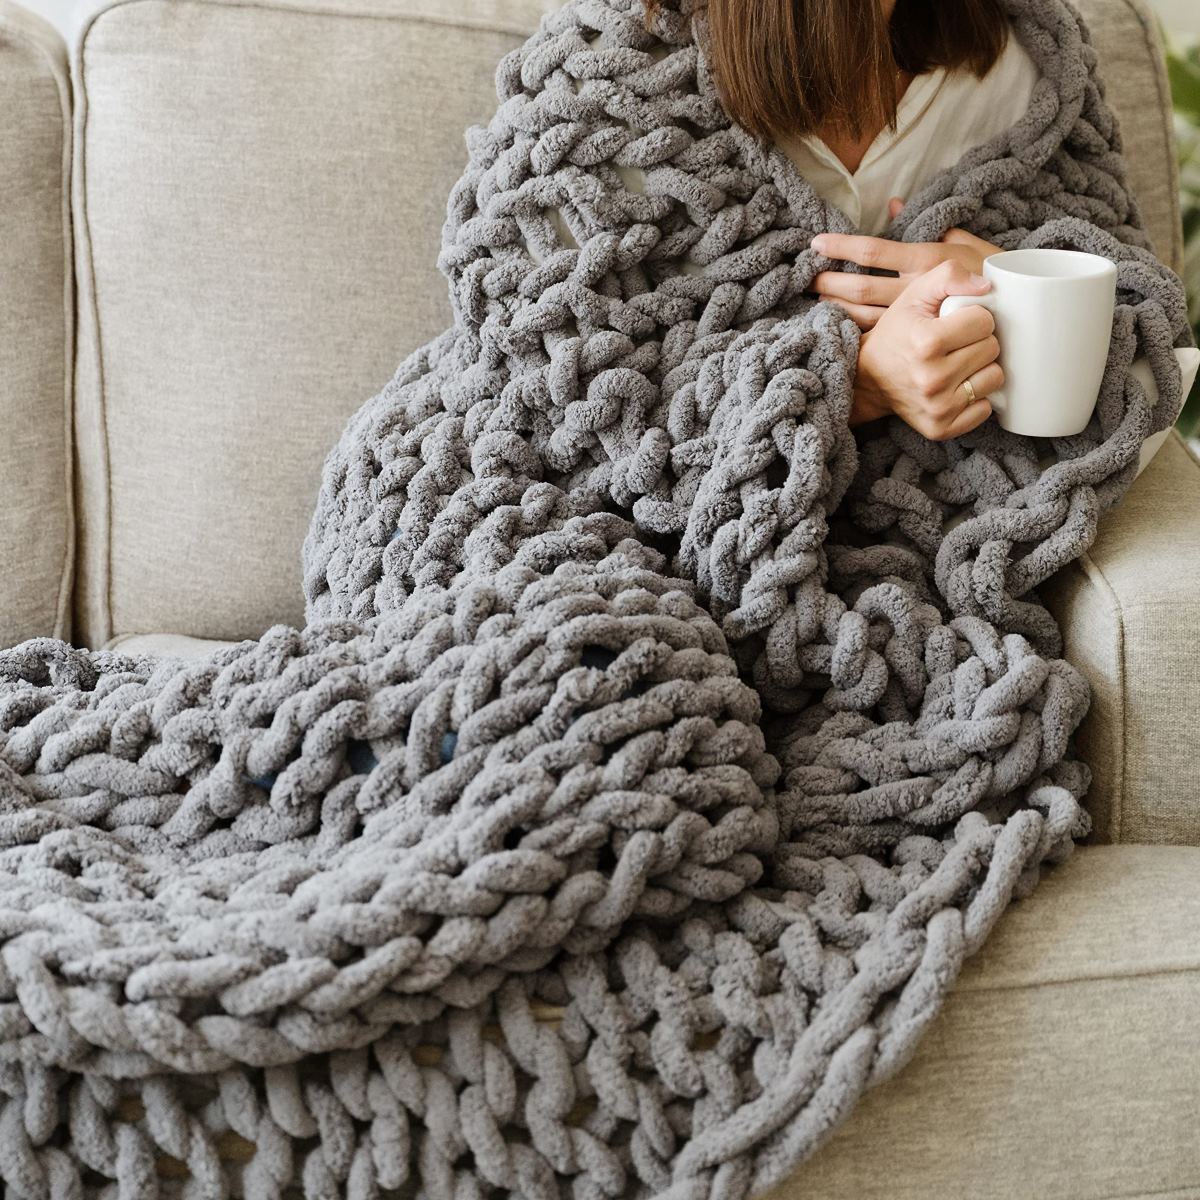 How To Finish A Crochet Blanket